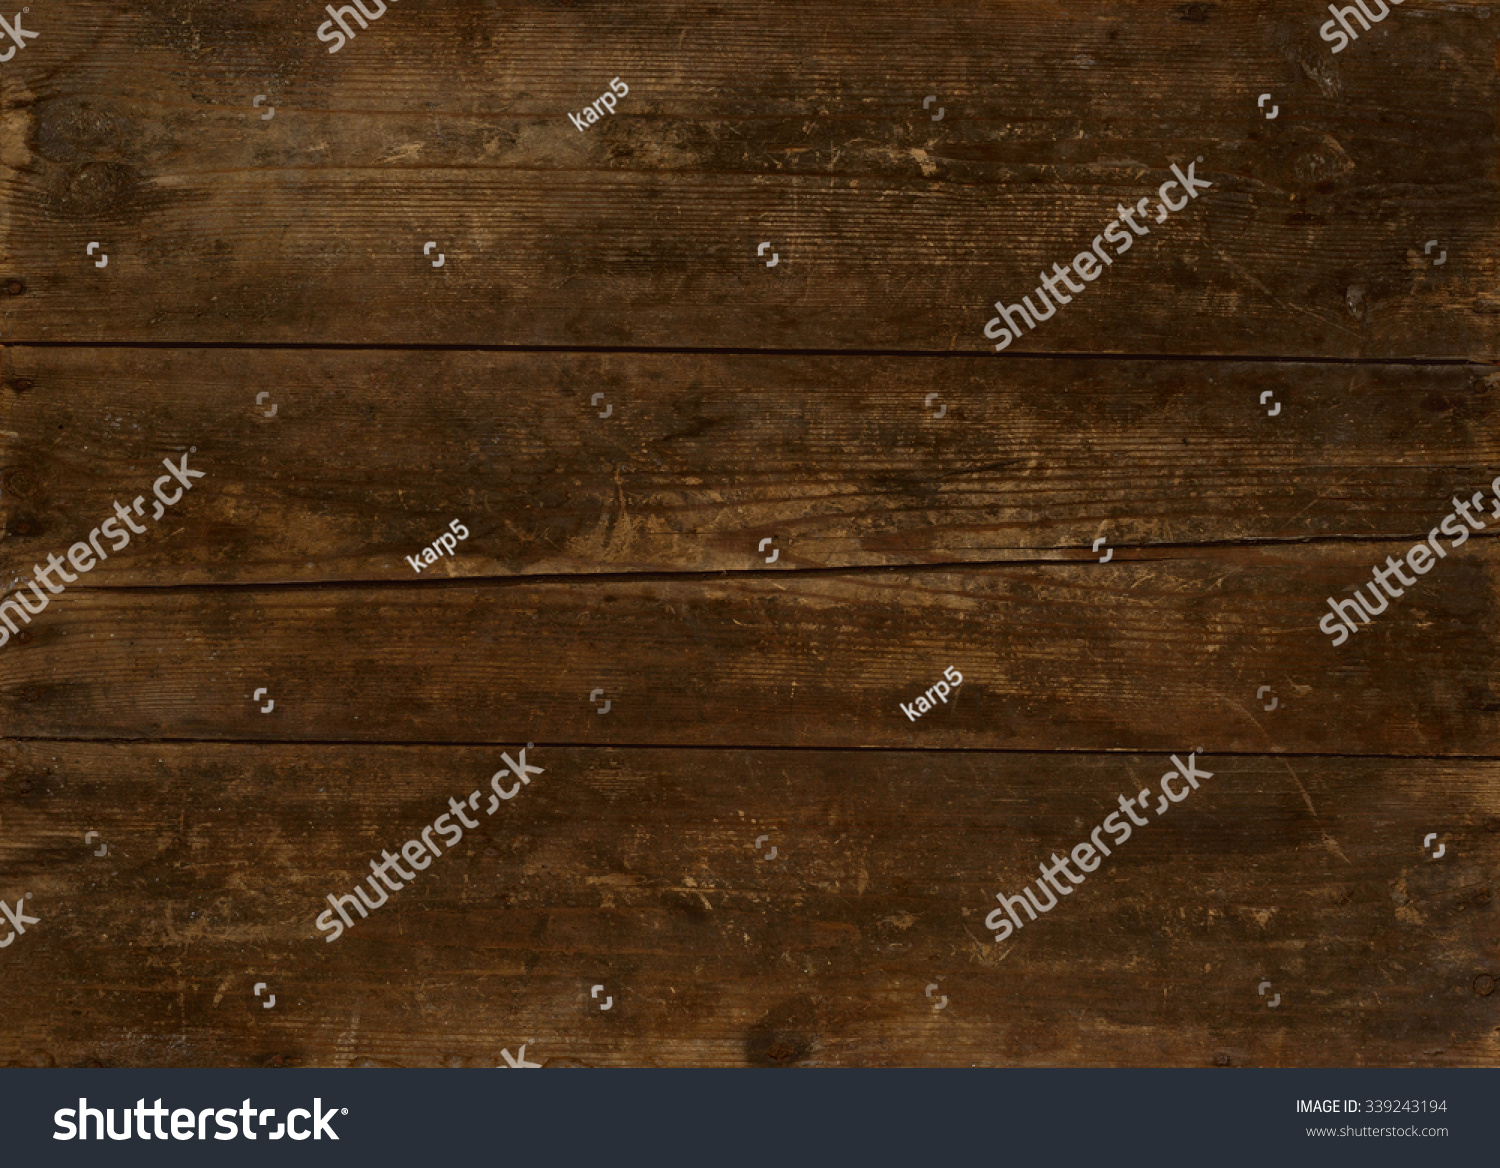 
Wooden background in retro style.
Old grunge sepia textured. #339243194